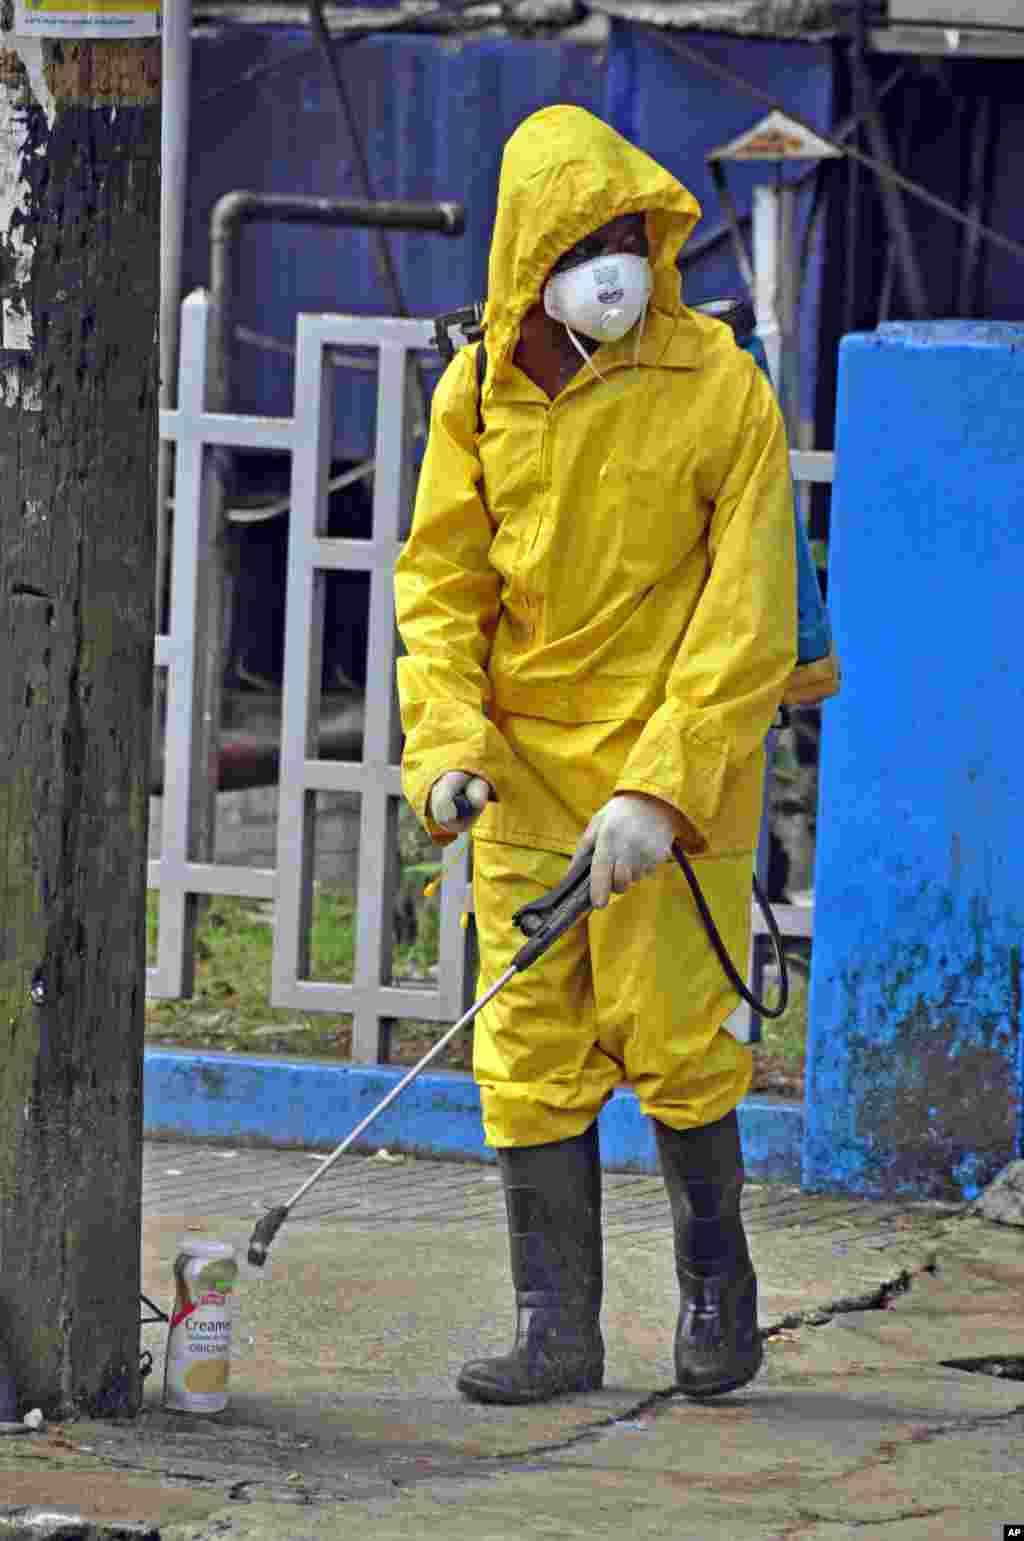 An employee of the Monrovia City Corporation sprays disinfectant along the streets to prevent the spread of the deadly Ebola virus, Monrovia, Liberia, August 1, 2014.